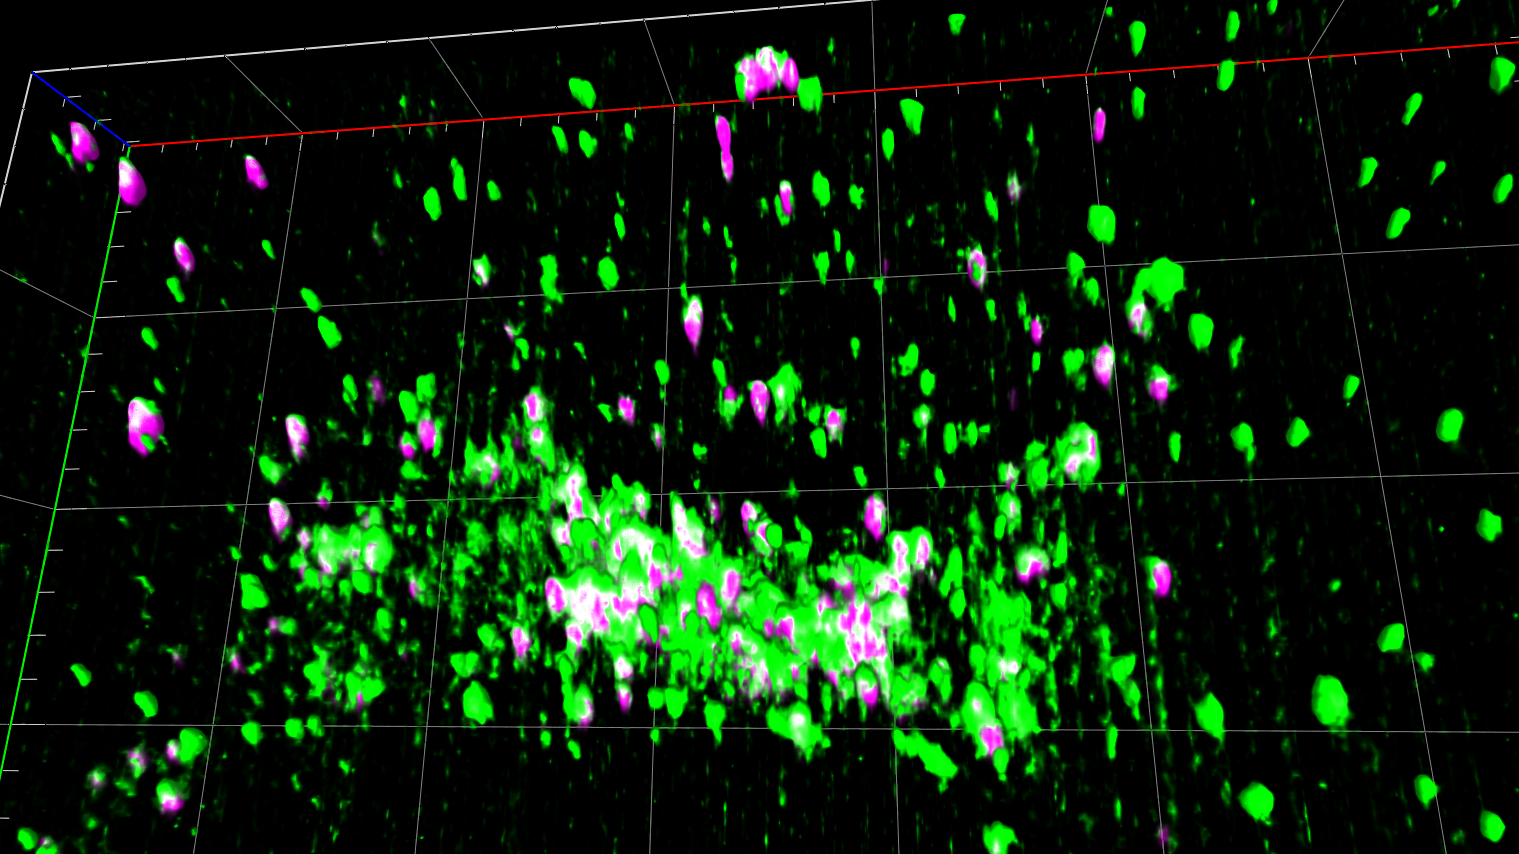 Figure C: Single time-point 3D view of data set. Single channels and merge image are shown. Note the (complete) overlap of Golgi7-labelled vesicles with a fraction of the Rab5a-labelled vesicles. Also note “striping artefacts” in the green channel.